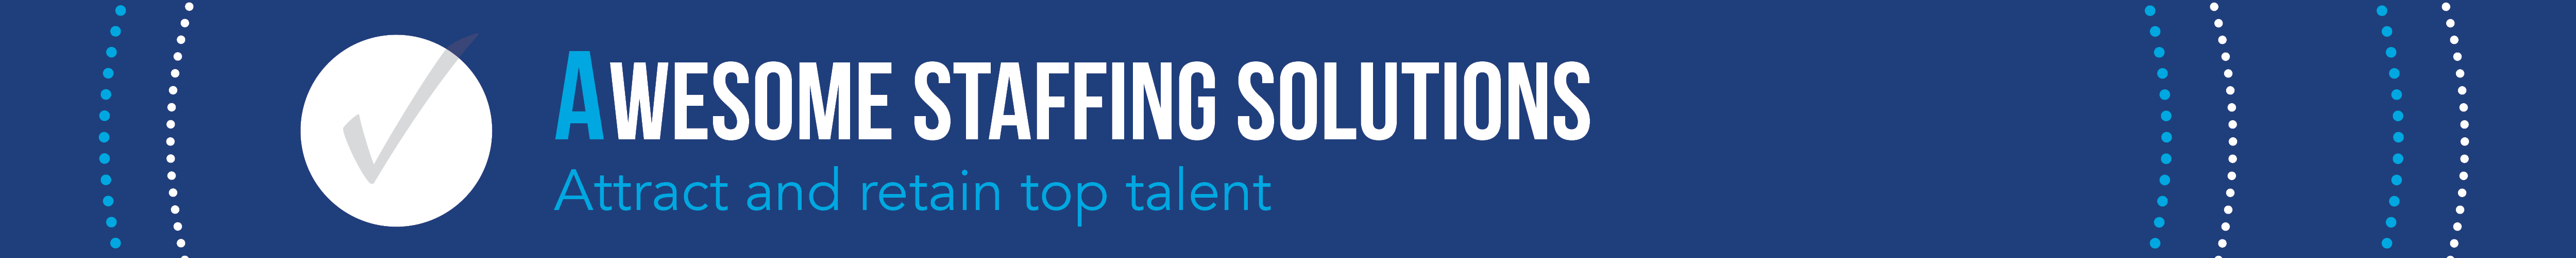 awesome staffing solutions